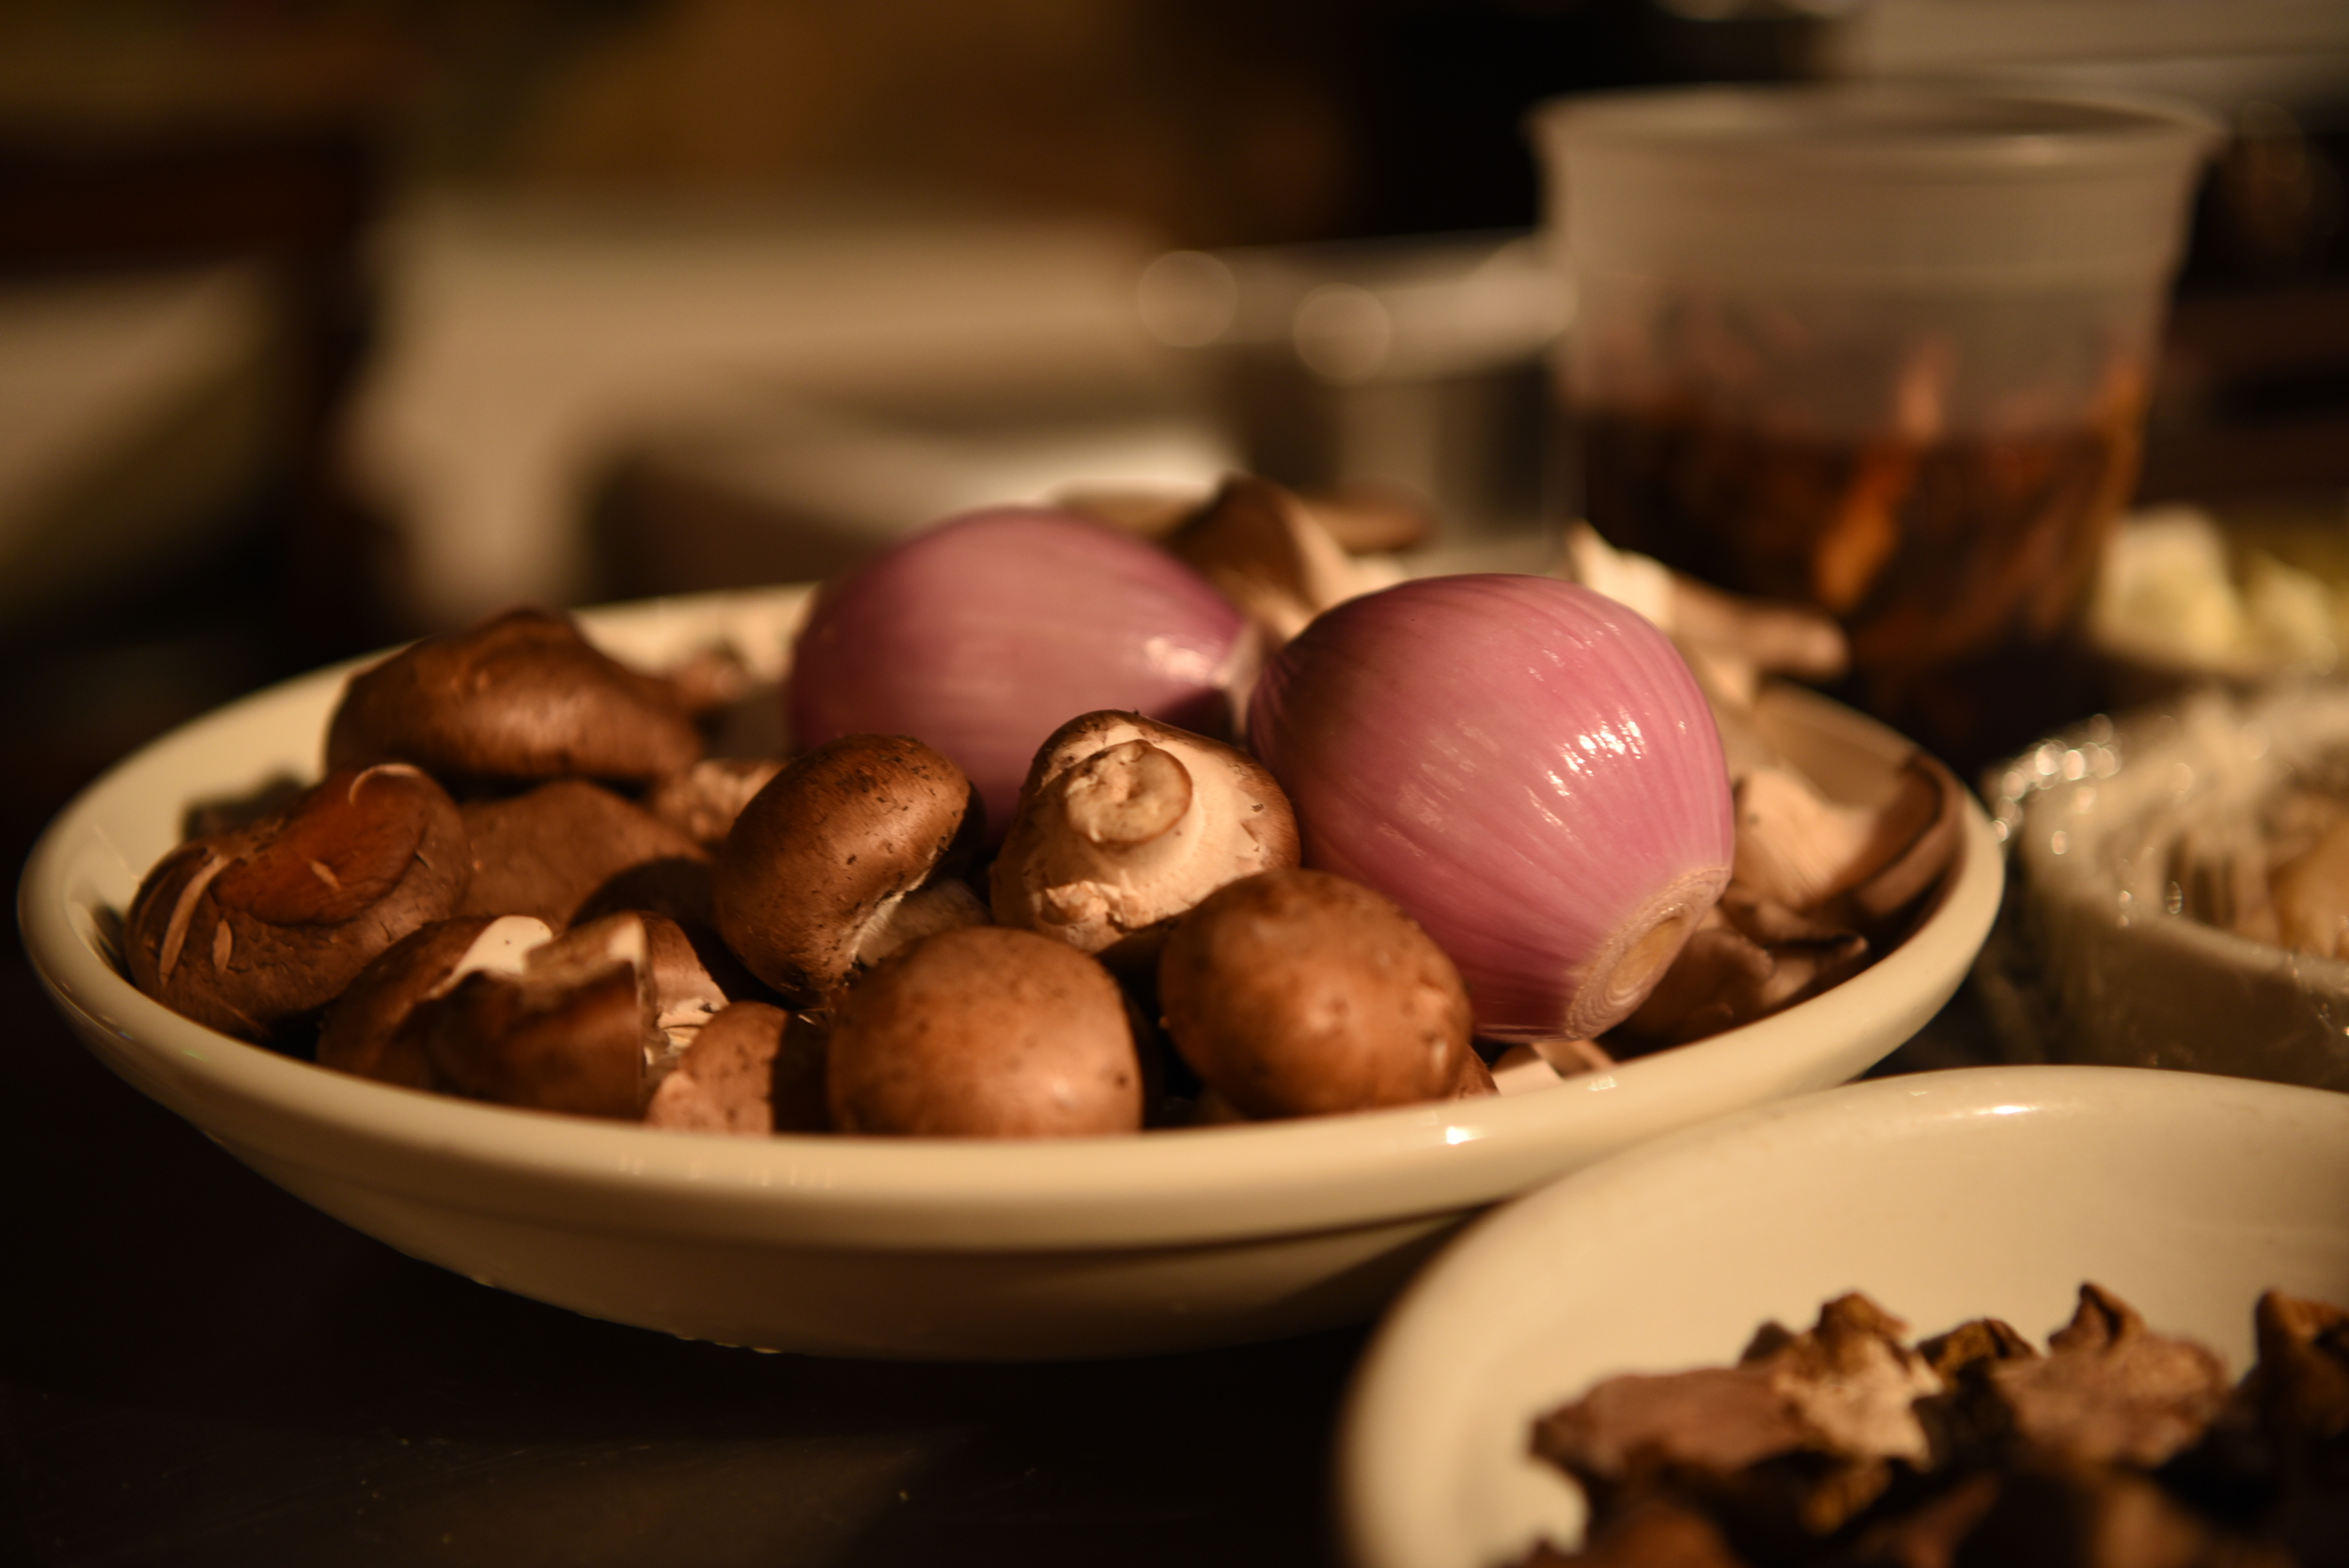 The smell of shallots, combined with garlic and mushrooms created a 